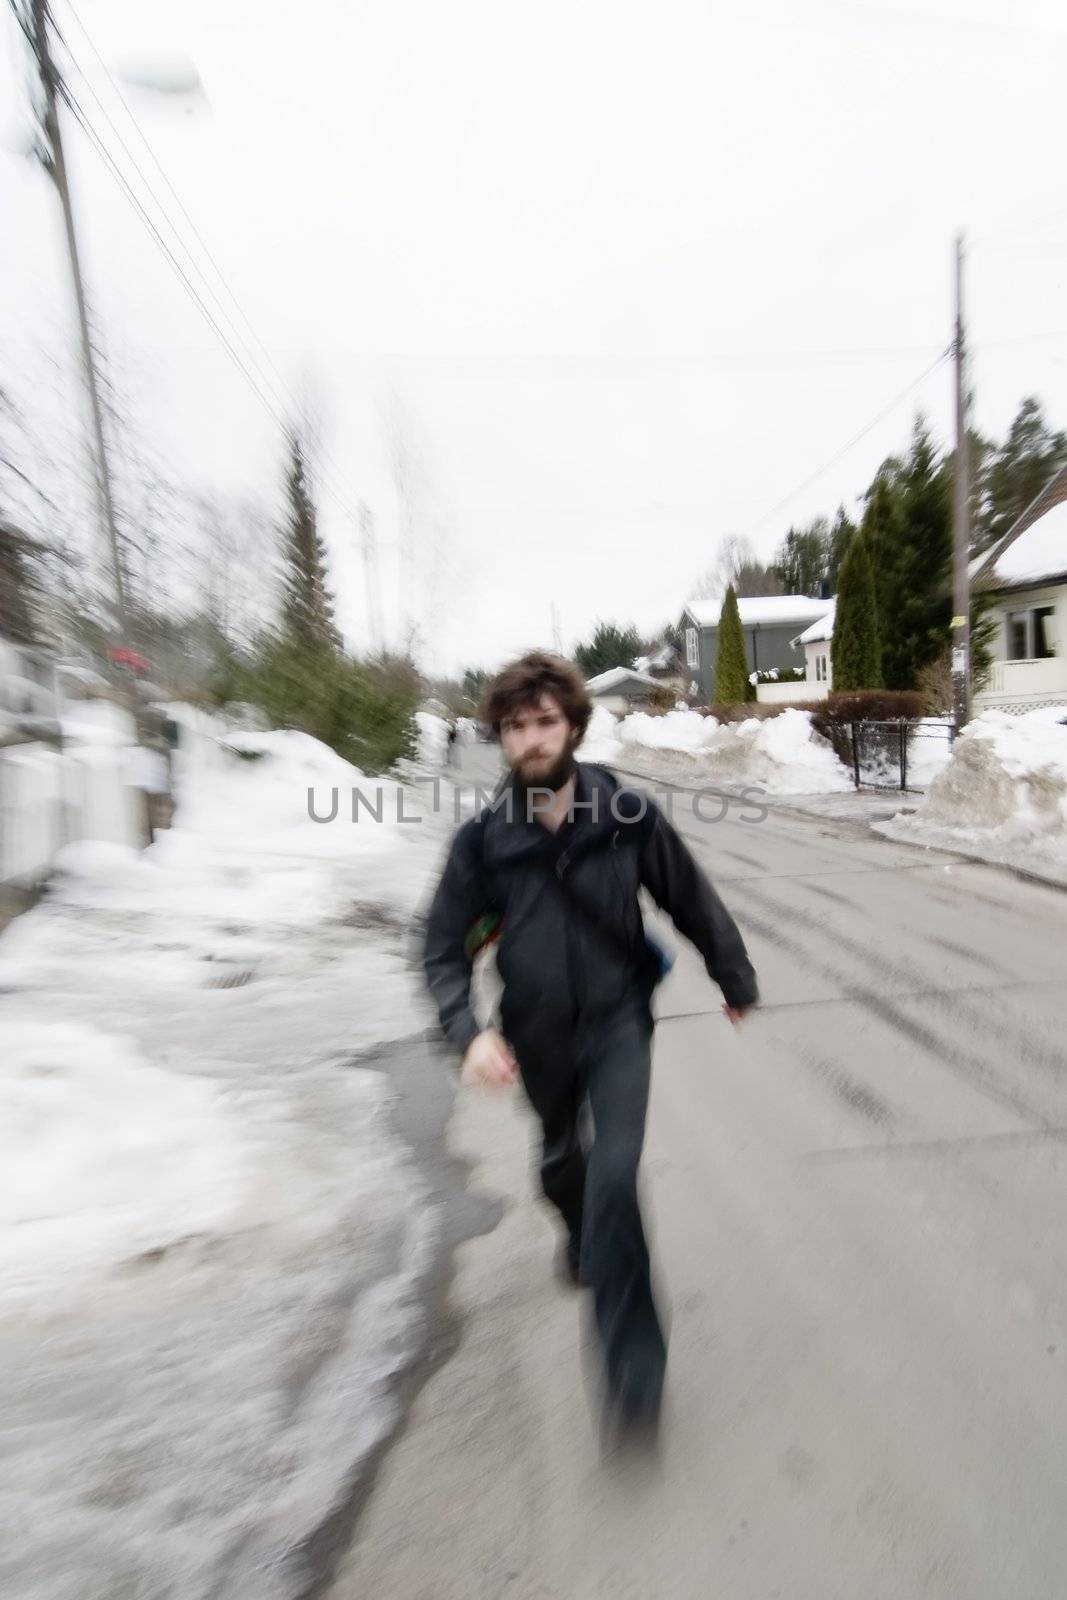 A motion blur abstract of a person walking in a hurry, a late rushing concept image.